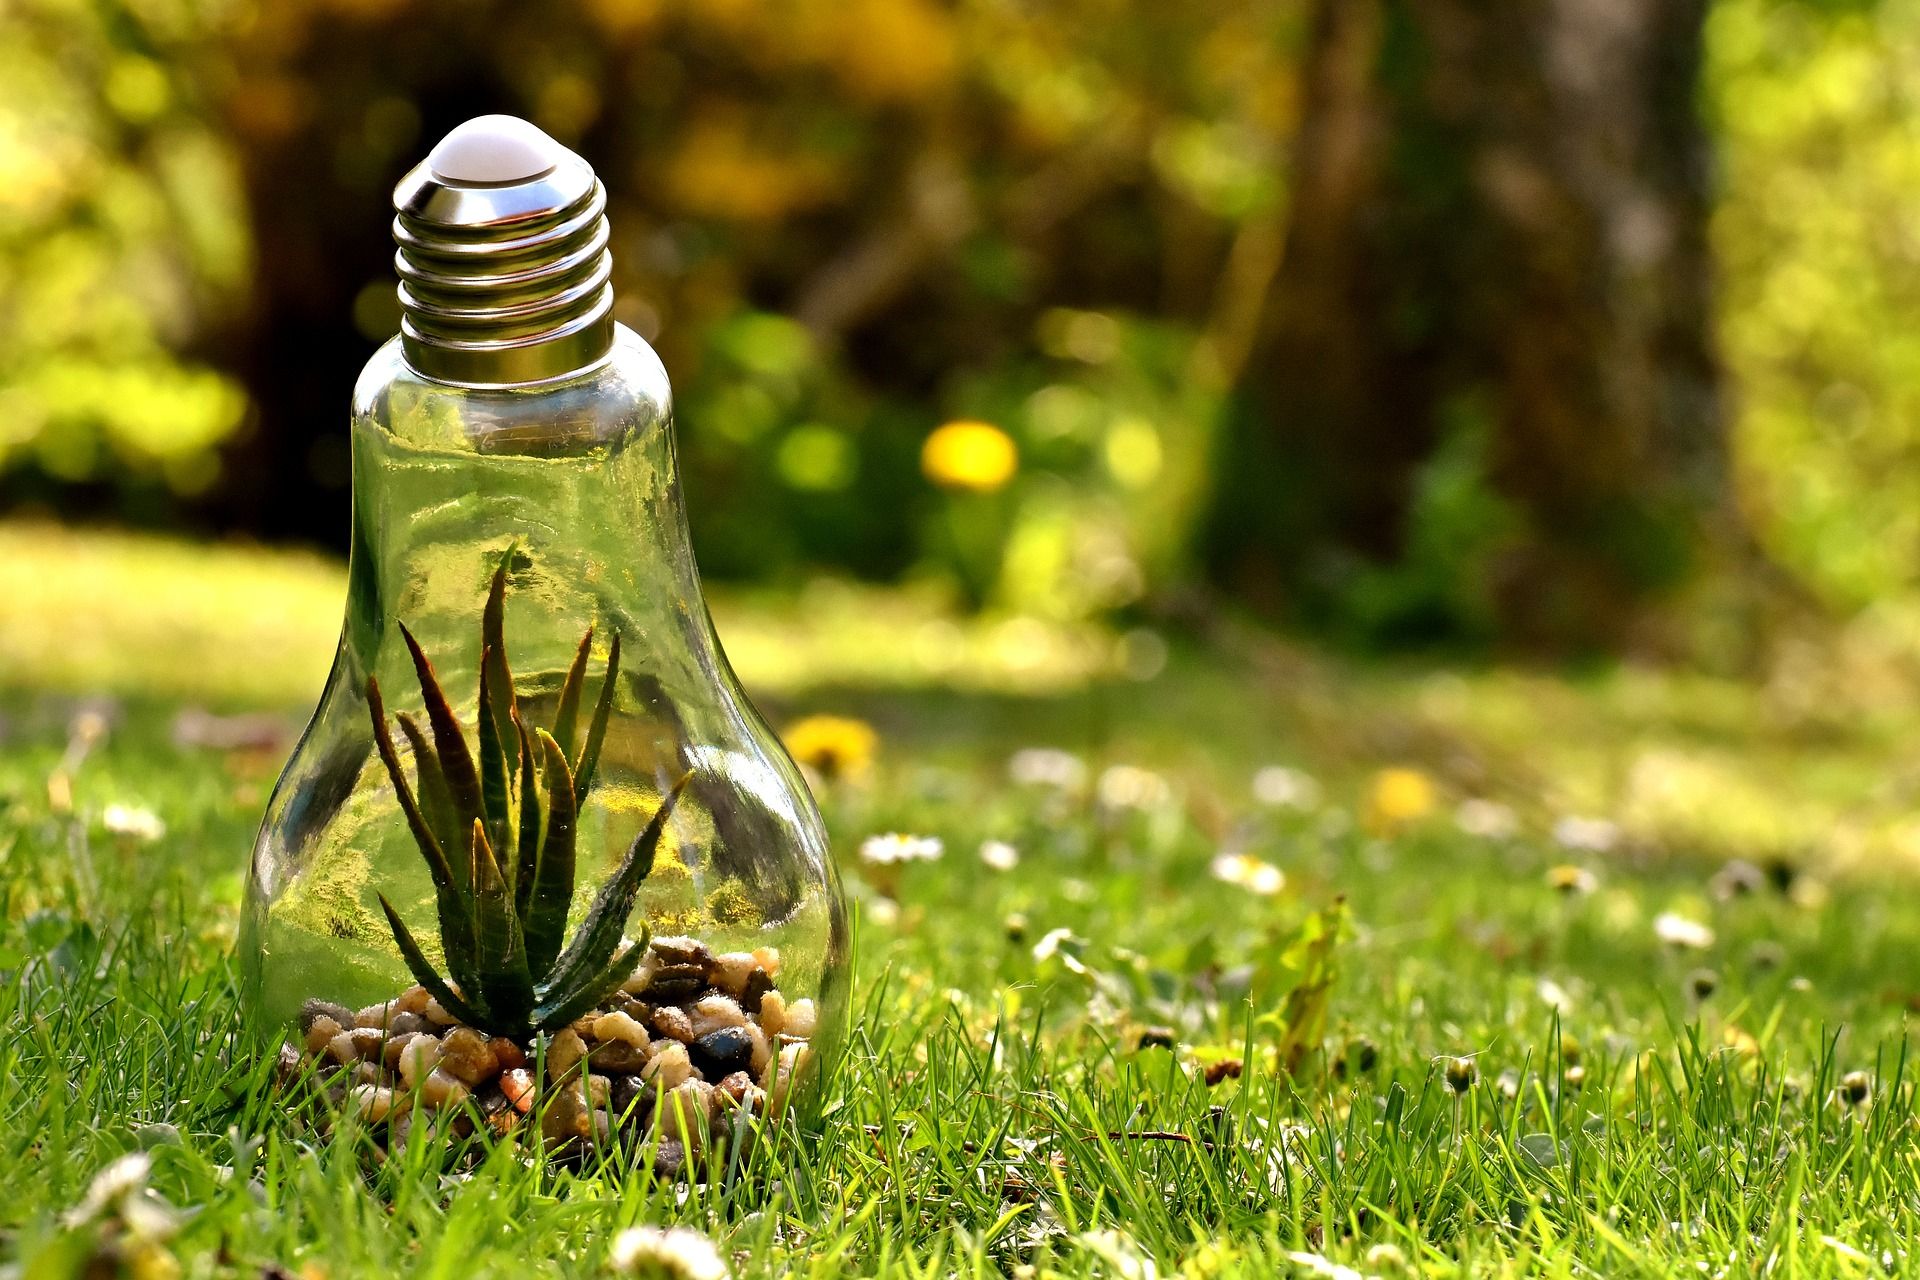 Light bulb with plants inside lying on the green grass